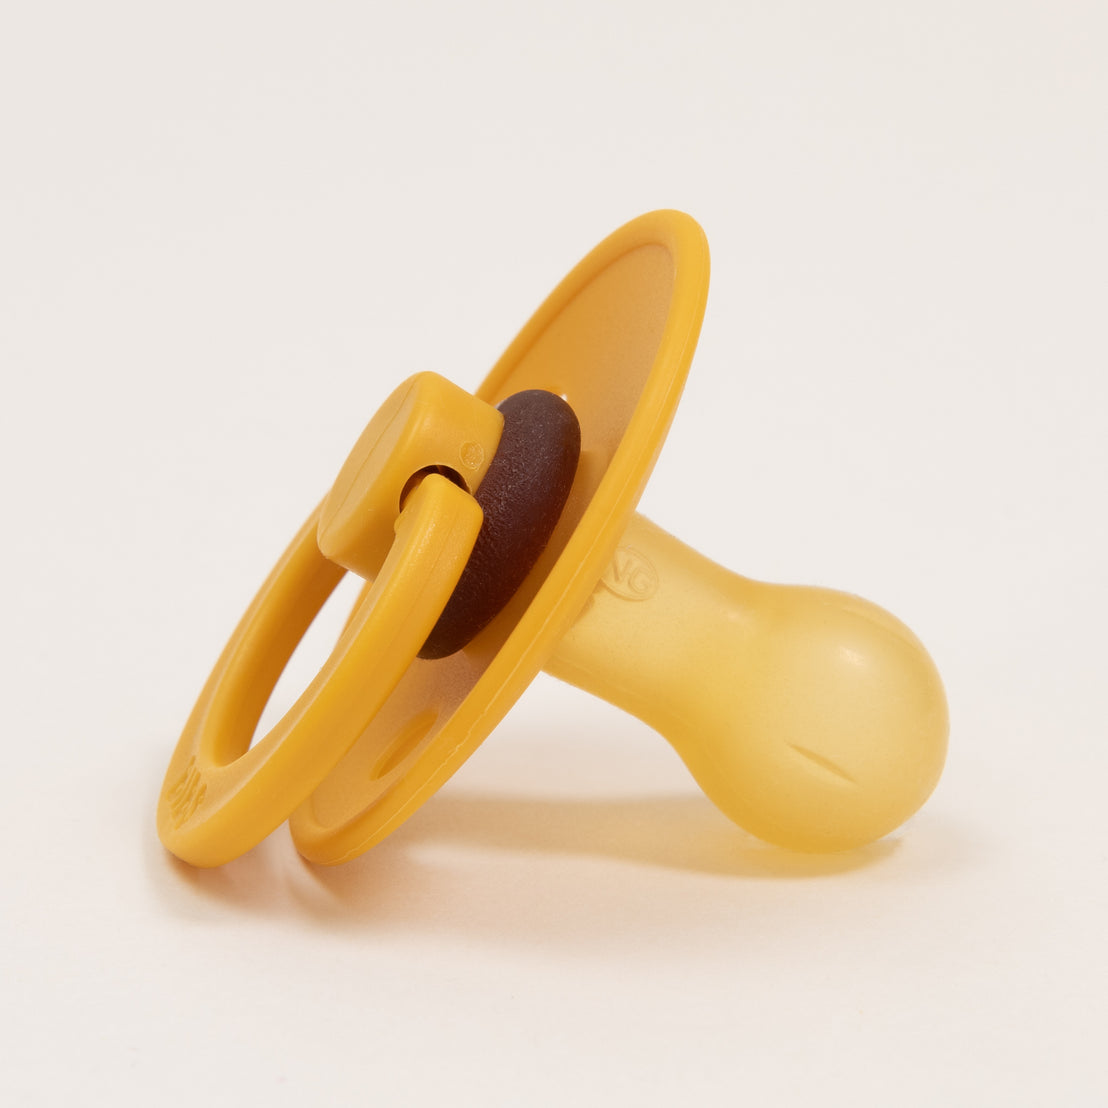 A yellow Bibs Pacifier in Honey Bee on a white background, featuring a round shield and a protruding handle. The nipple section is brown and attached centrally to the shield.